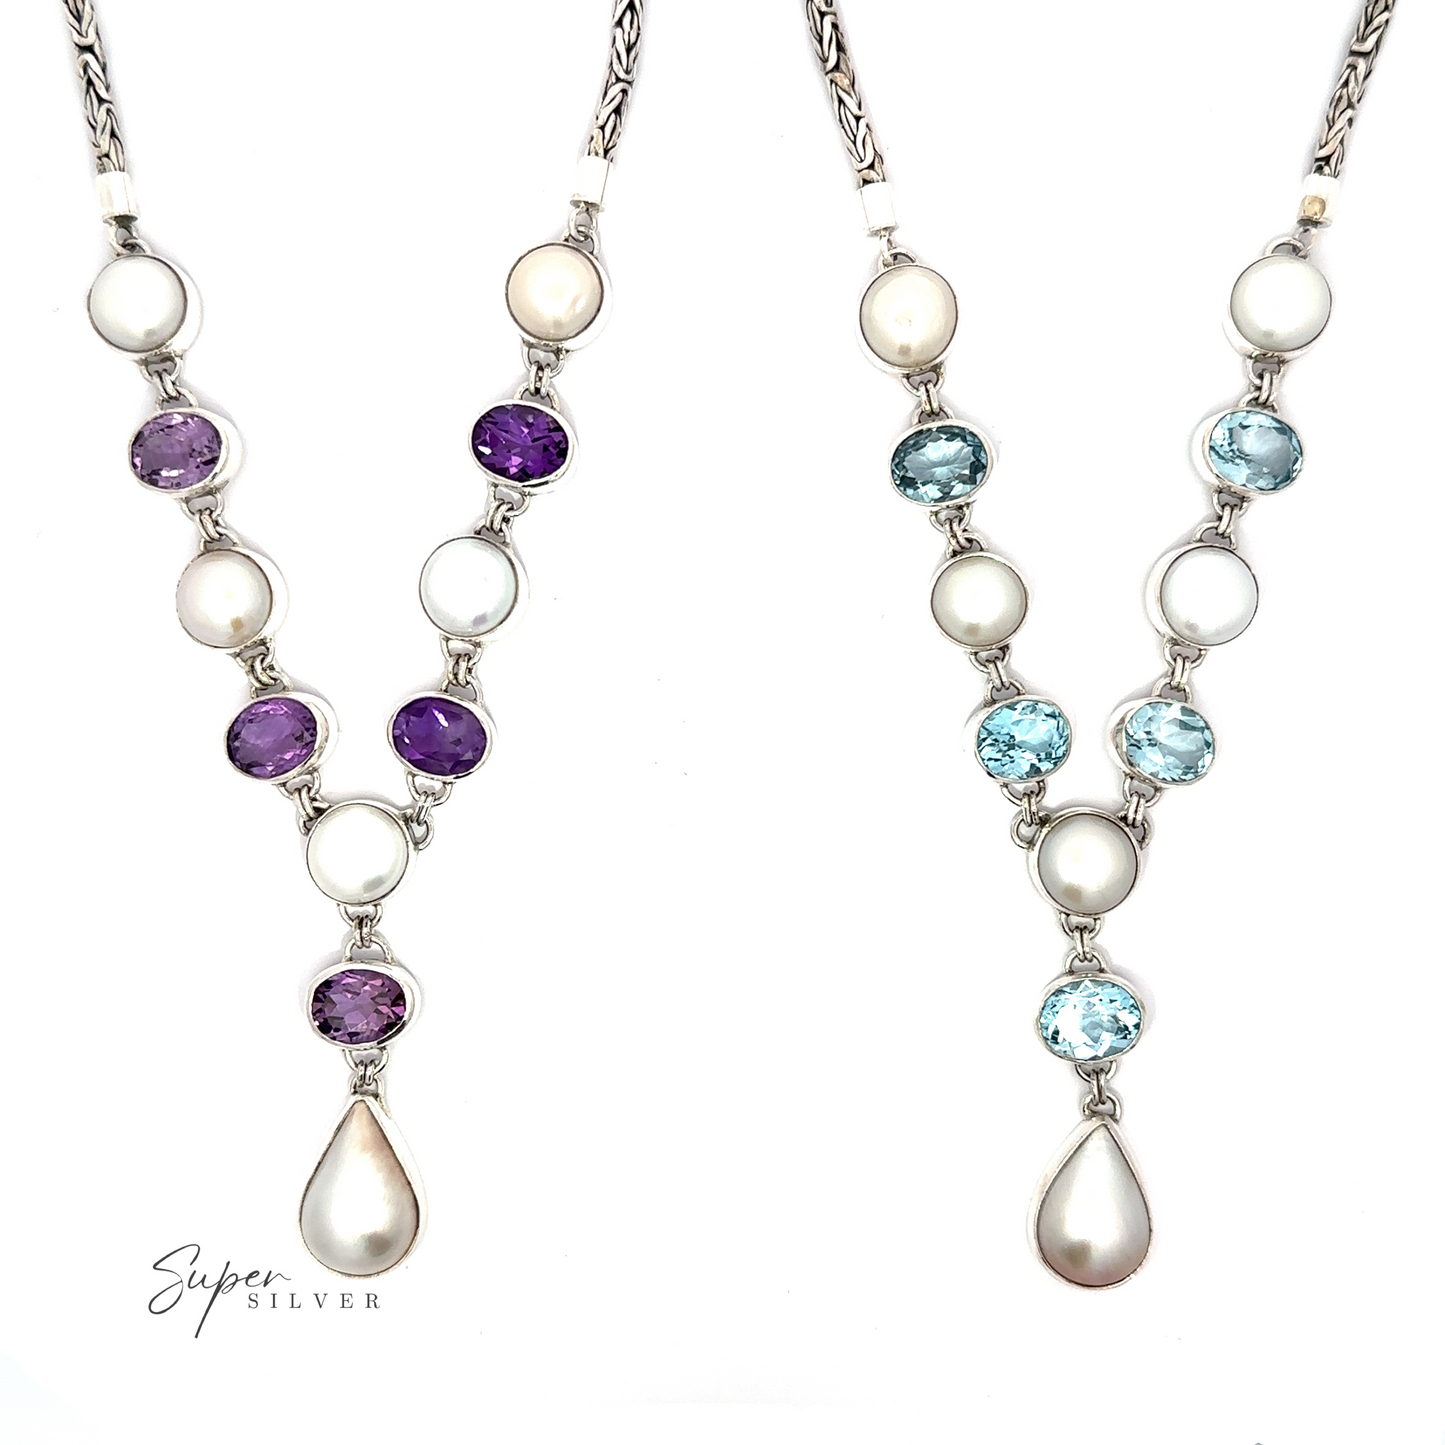 Two Stunning Pearl and Gemstone Statement Necklaces with alternating gemstones and pearls. One features purple stones set in Sterling Silver, while the other showcases blue stones. Each necklace ends in a teardrop-shaped pearl pendant.